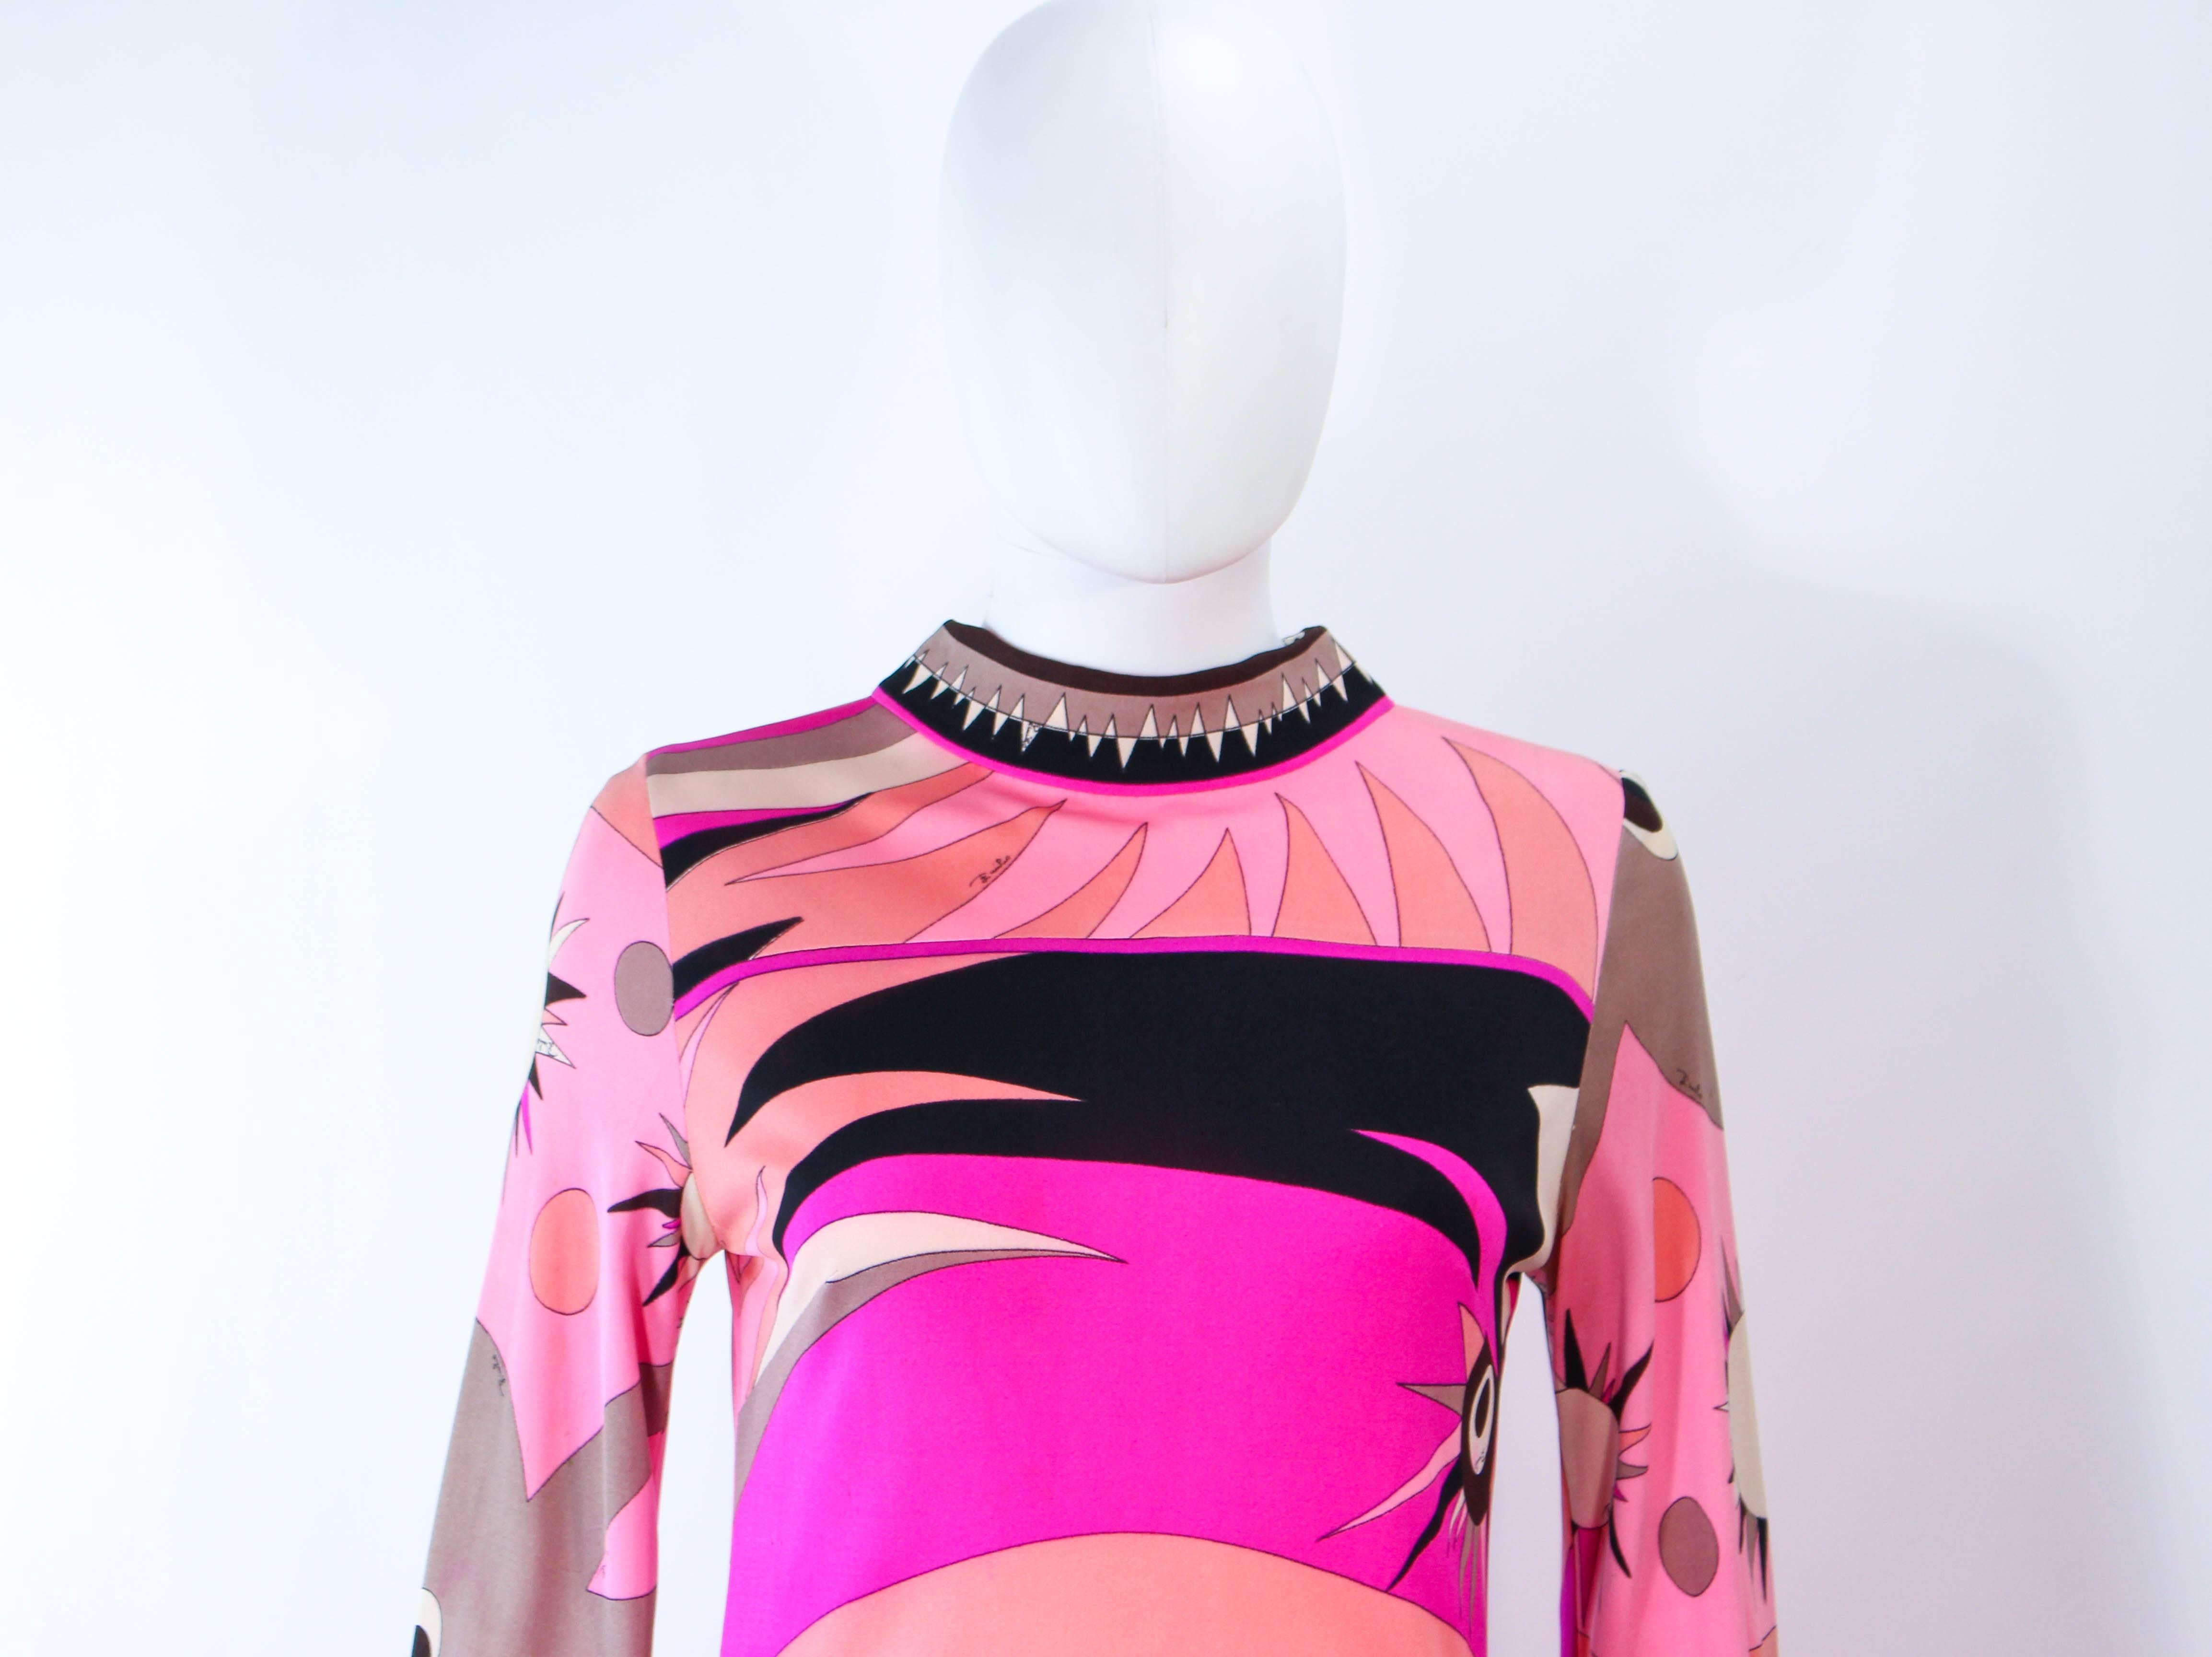 Women's EMILIO PUCCI 1960's Pink Abstract Print Stretch Dress Size 4 6 